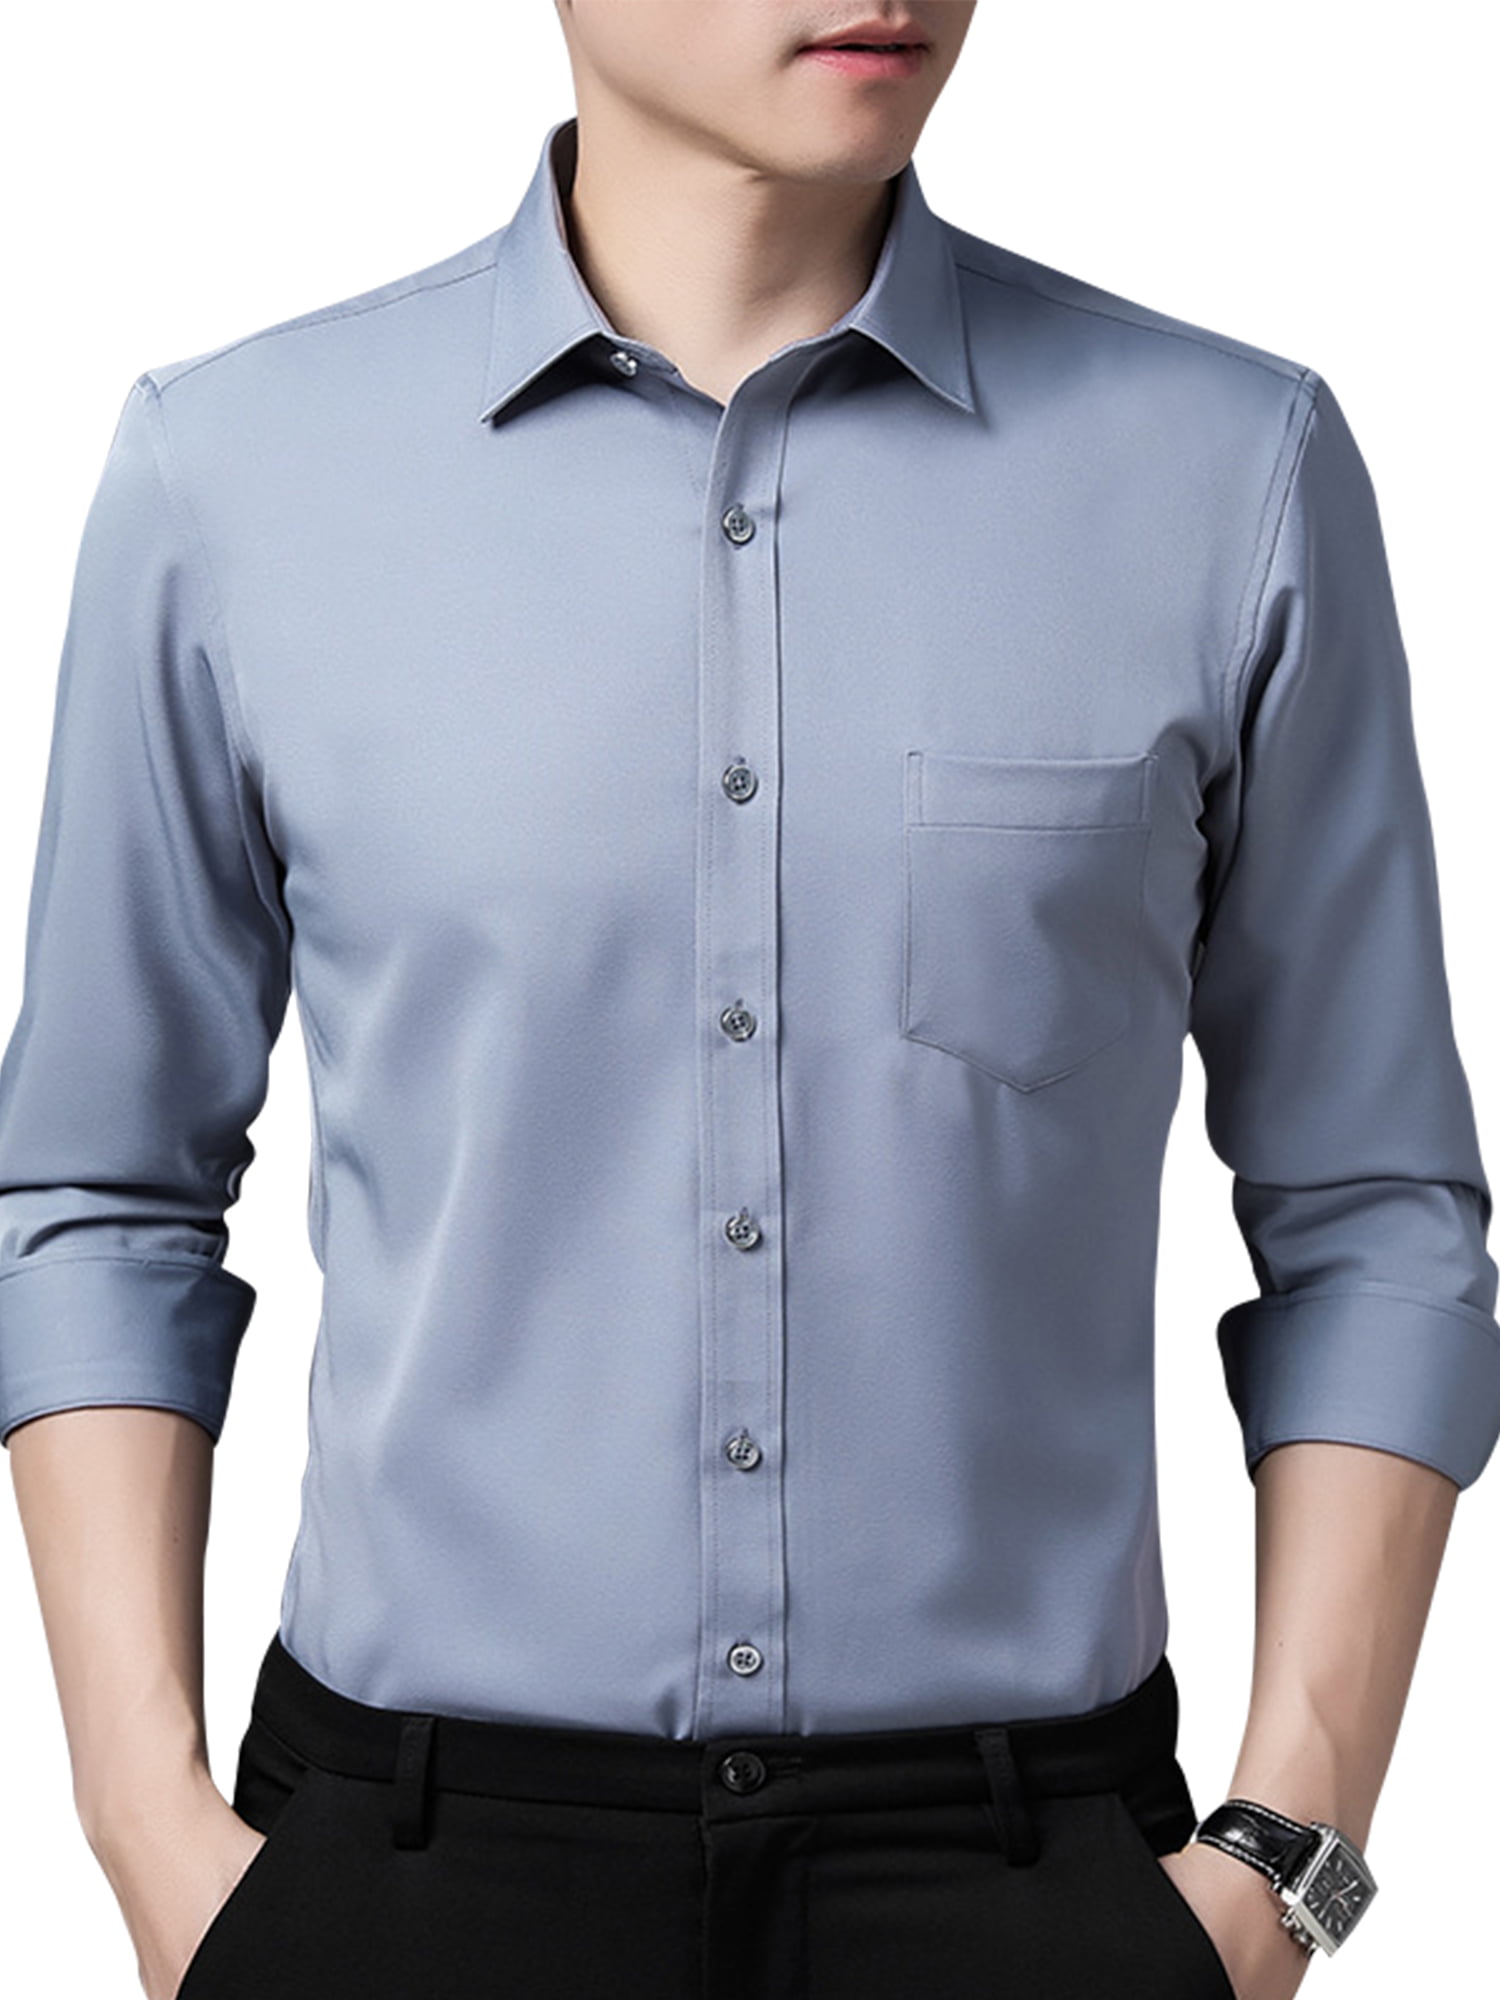 Sweatwater Mens Casual Button-Down Long Sleeve Business Pure Colour Slim Fit Dress Shirt 